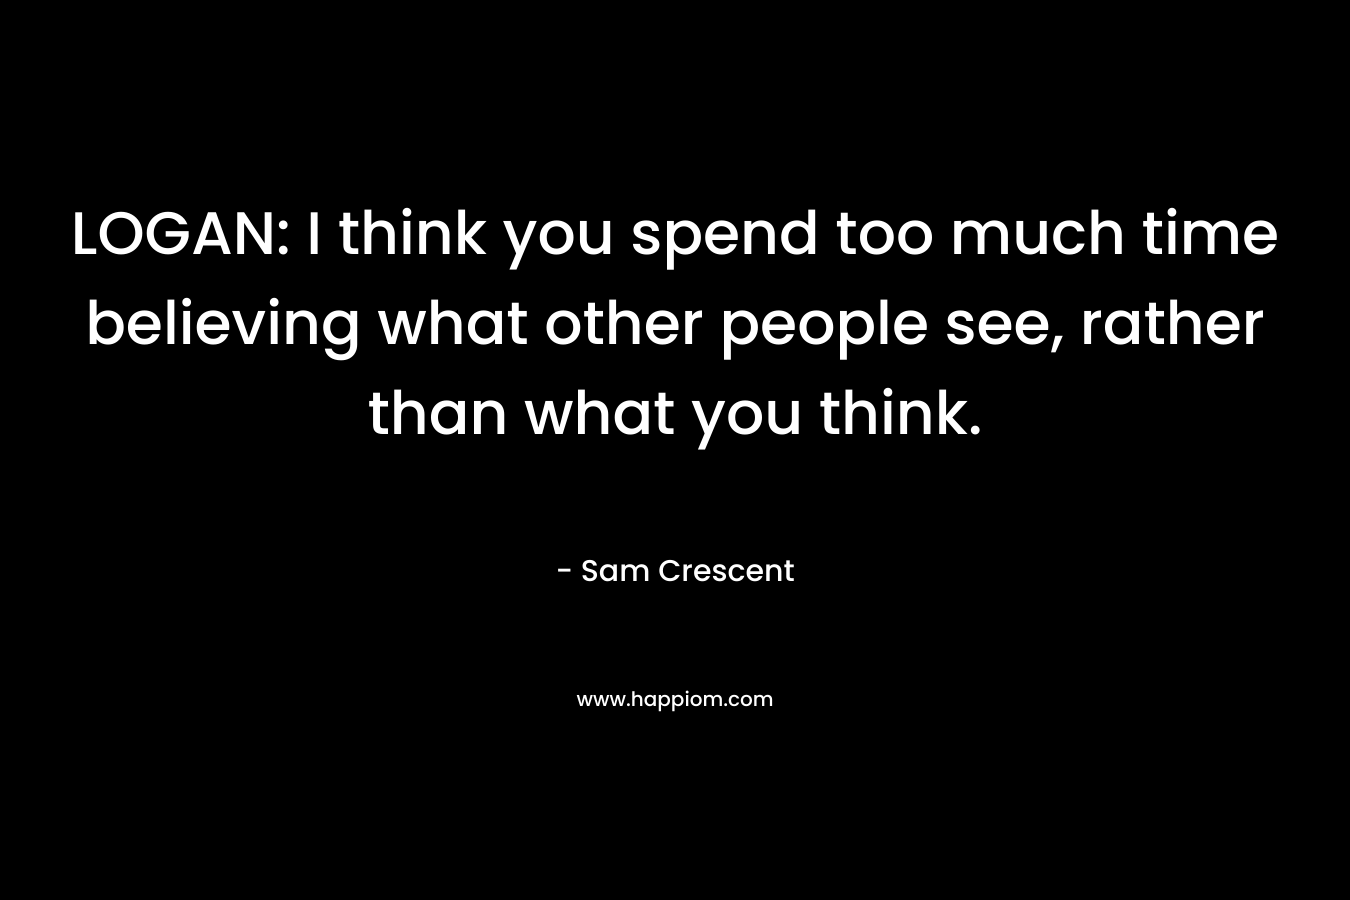 LOGAN: I think you spend too much time believing what other people see, rather than what you think. – Sam Crescent